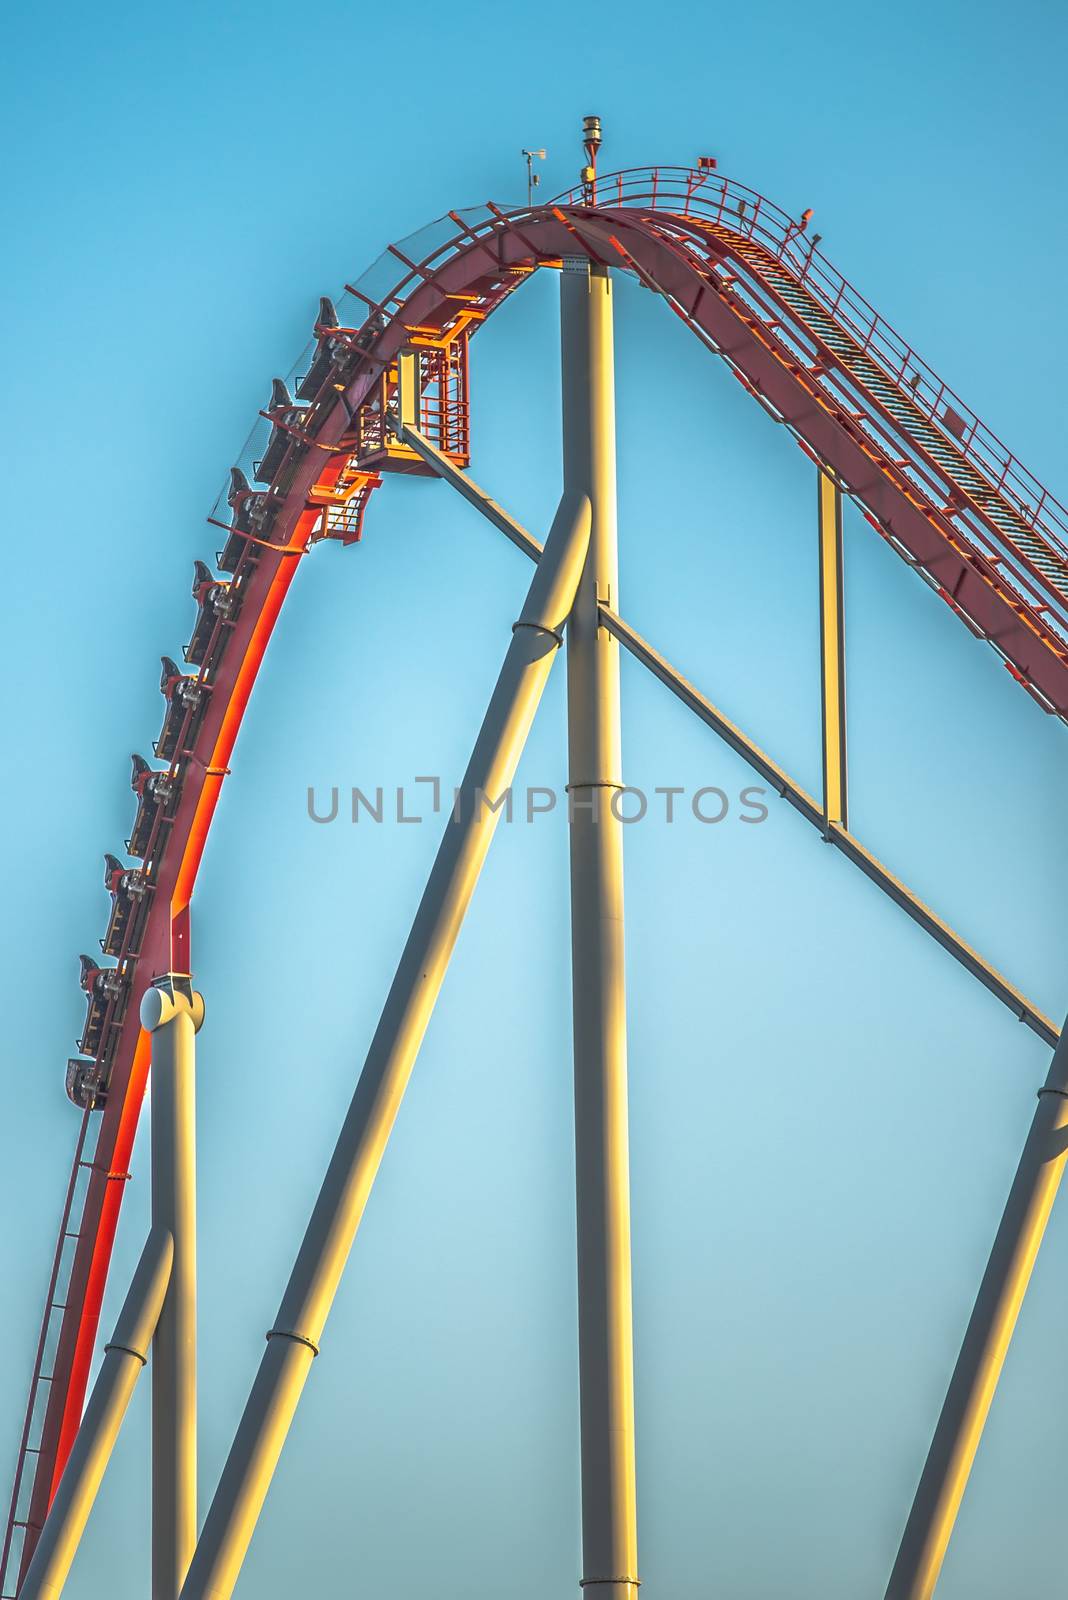 rollercoaster rides at an amusement park in south carolina by digidreamgrafix